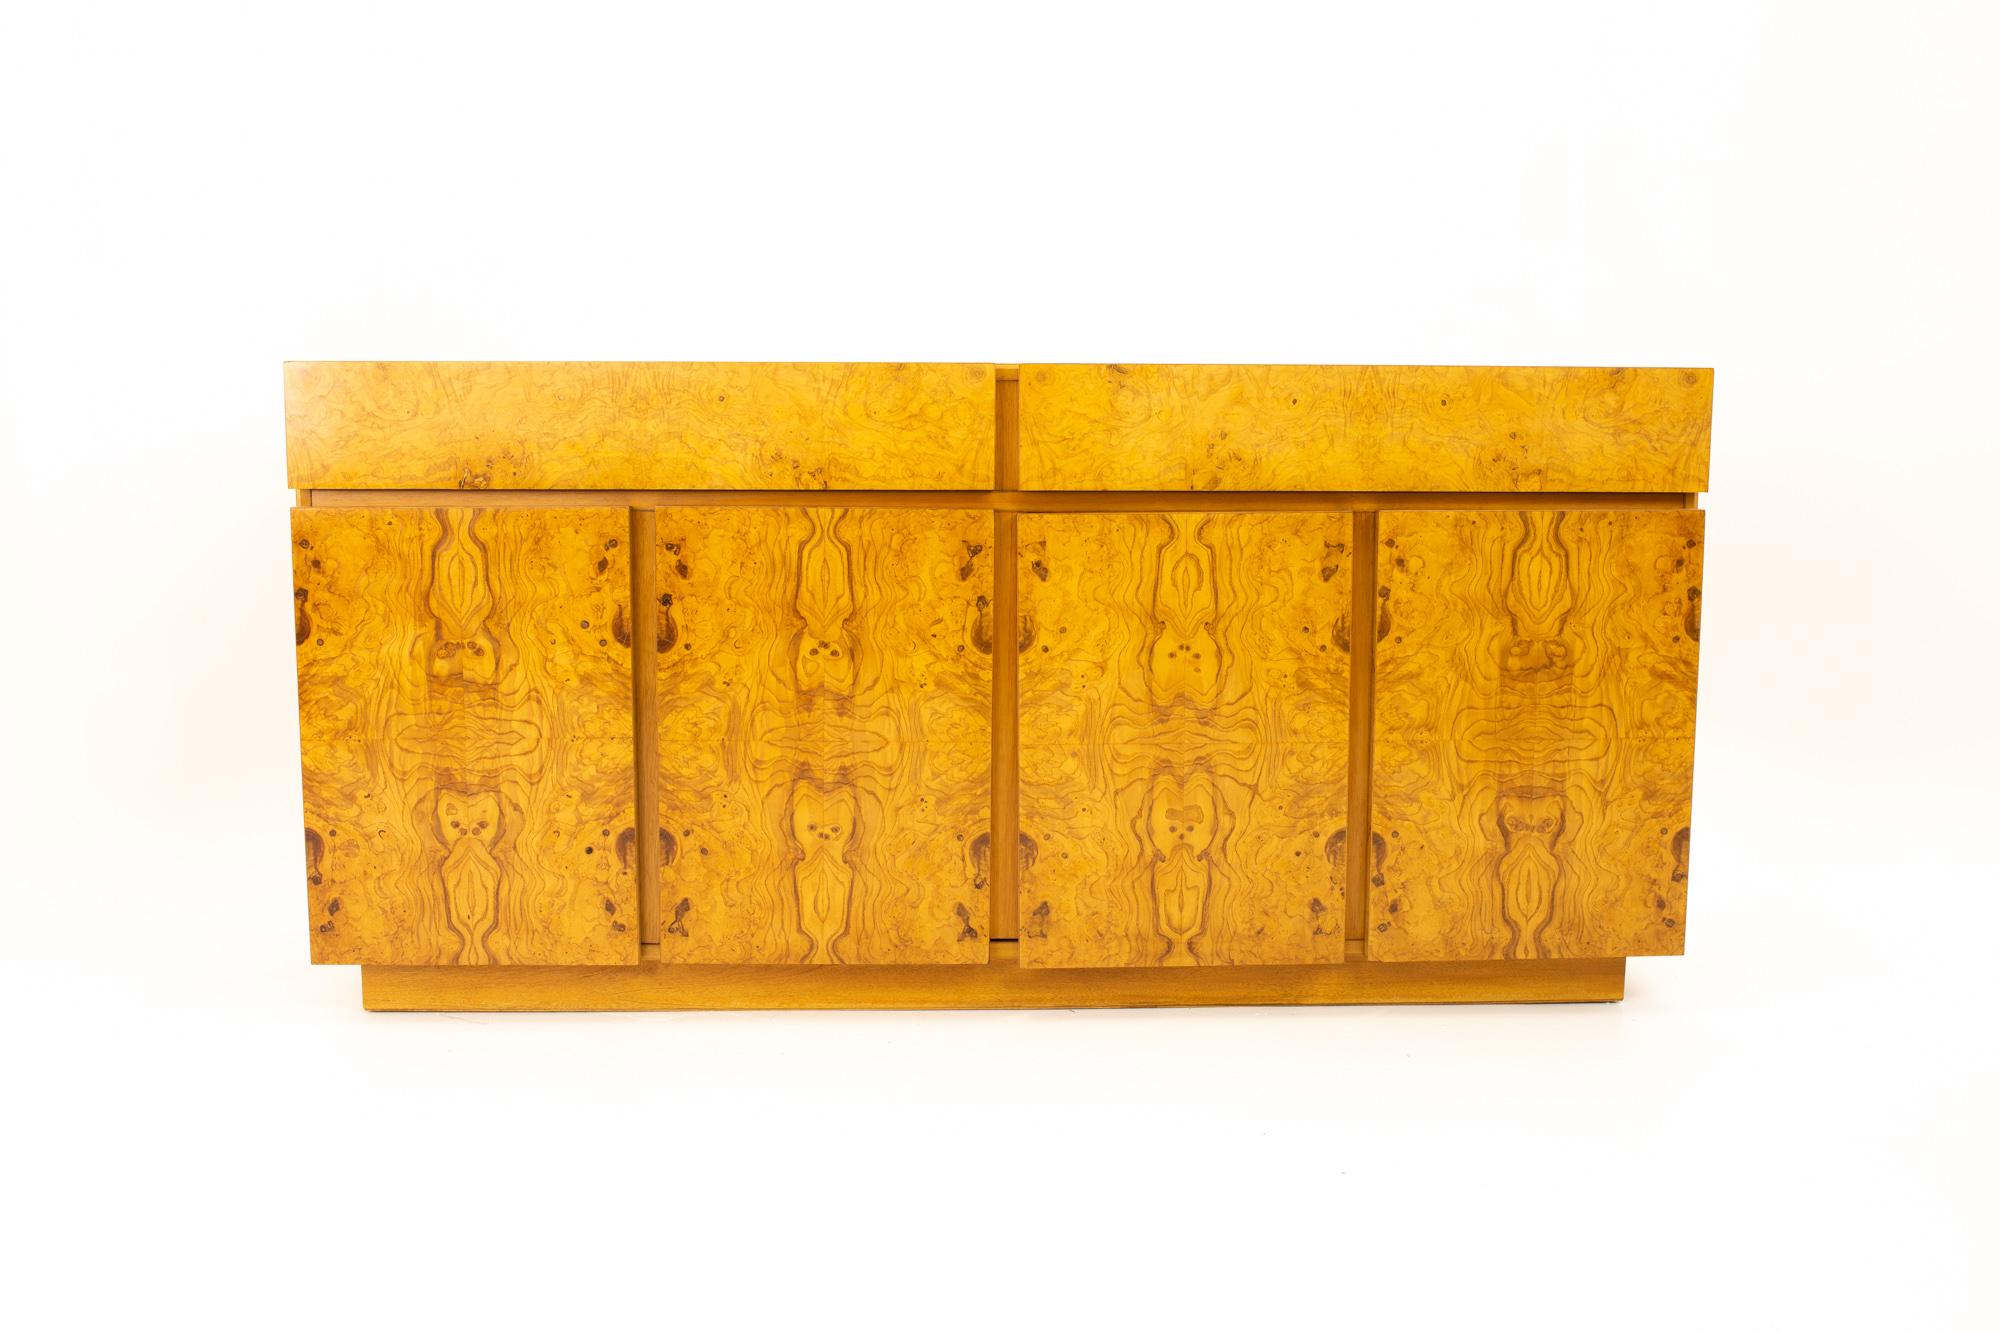 Milo Baughman style lane mid century burlwood and oak sideboard credenza.
Credenza measures: 68 wide x 18 deep x 32 high

All pieces of furniture can be had in what we call restored vintage condition. That means the piece is restored upon